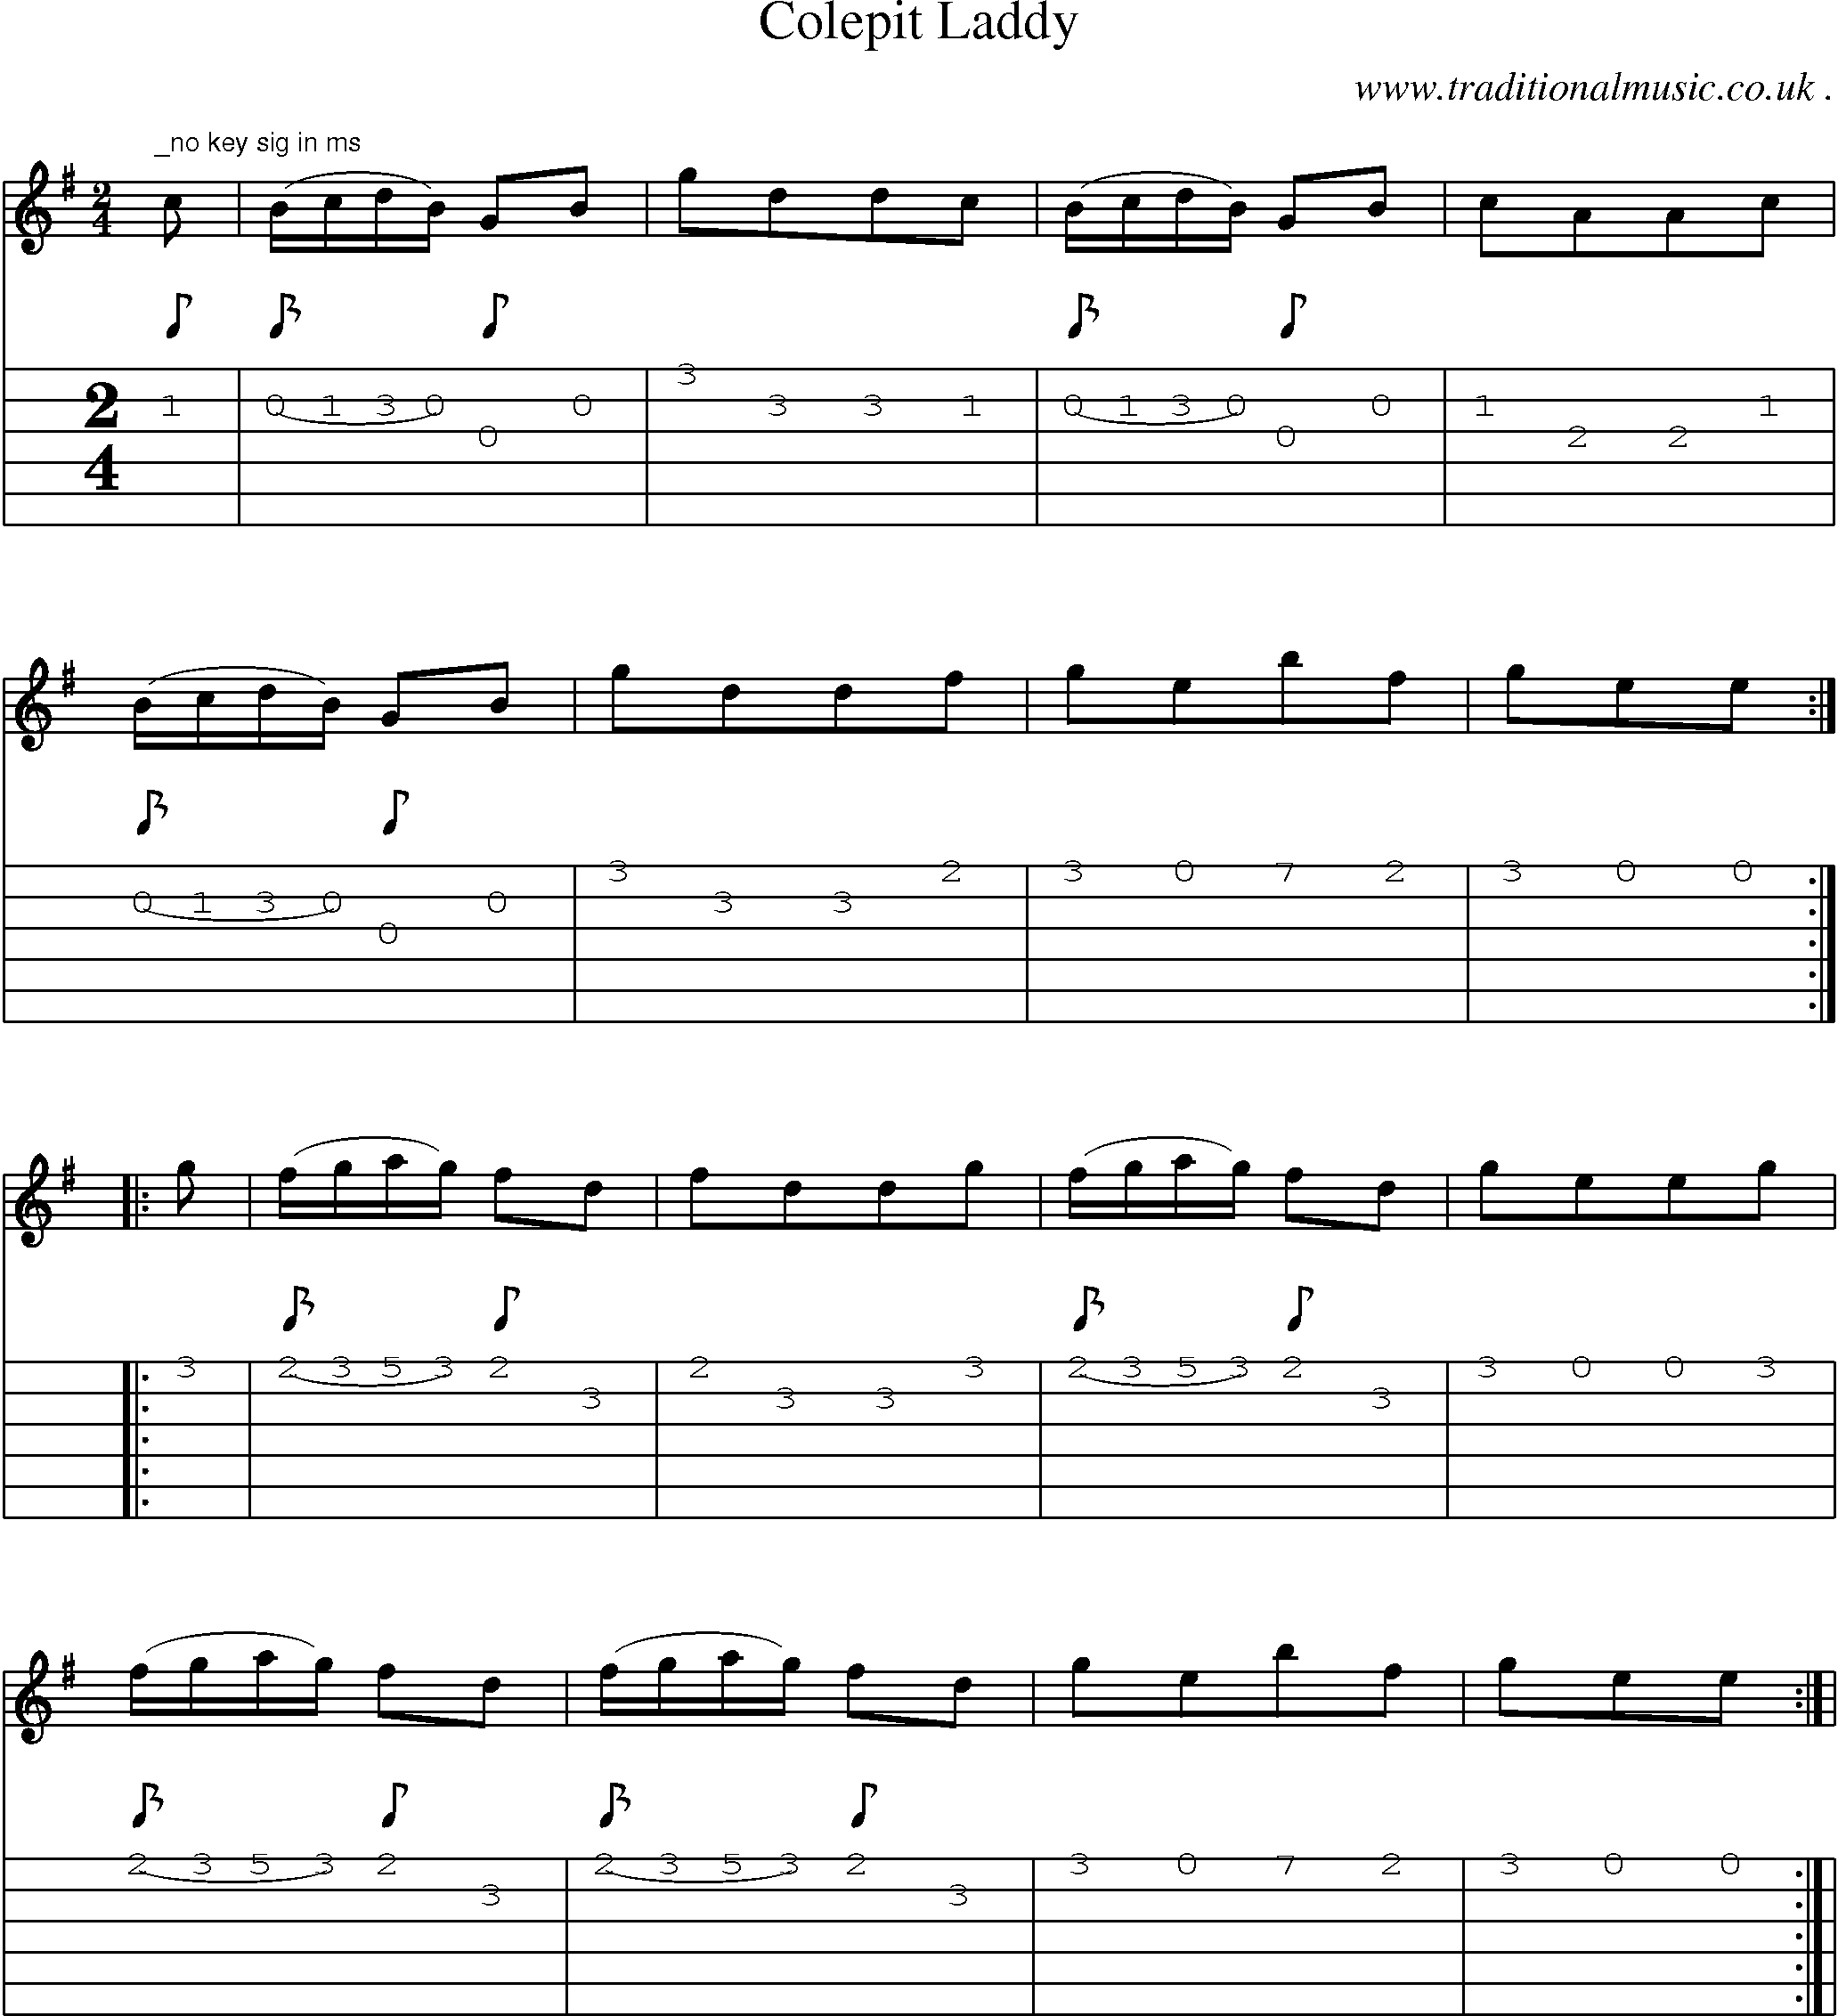 Sheet-Music and Guitar Tabs for Colepit Laddy